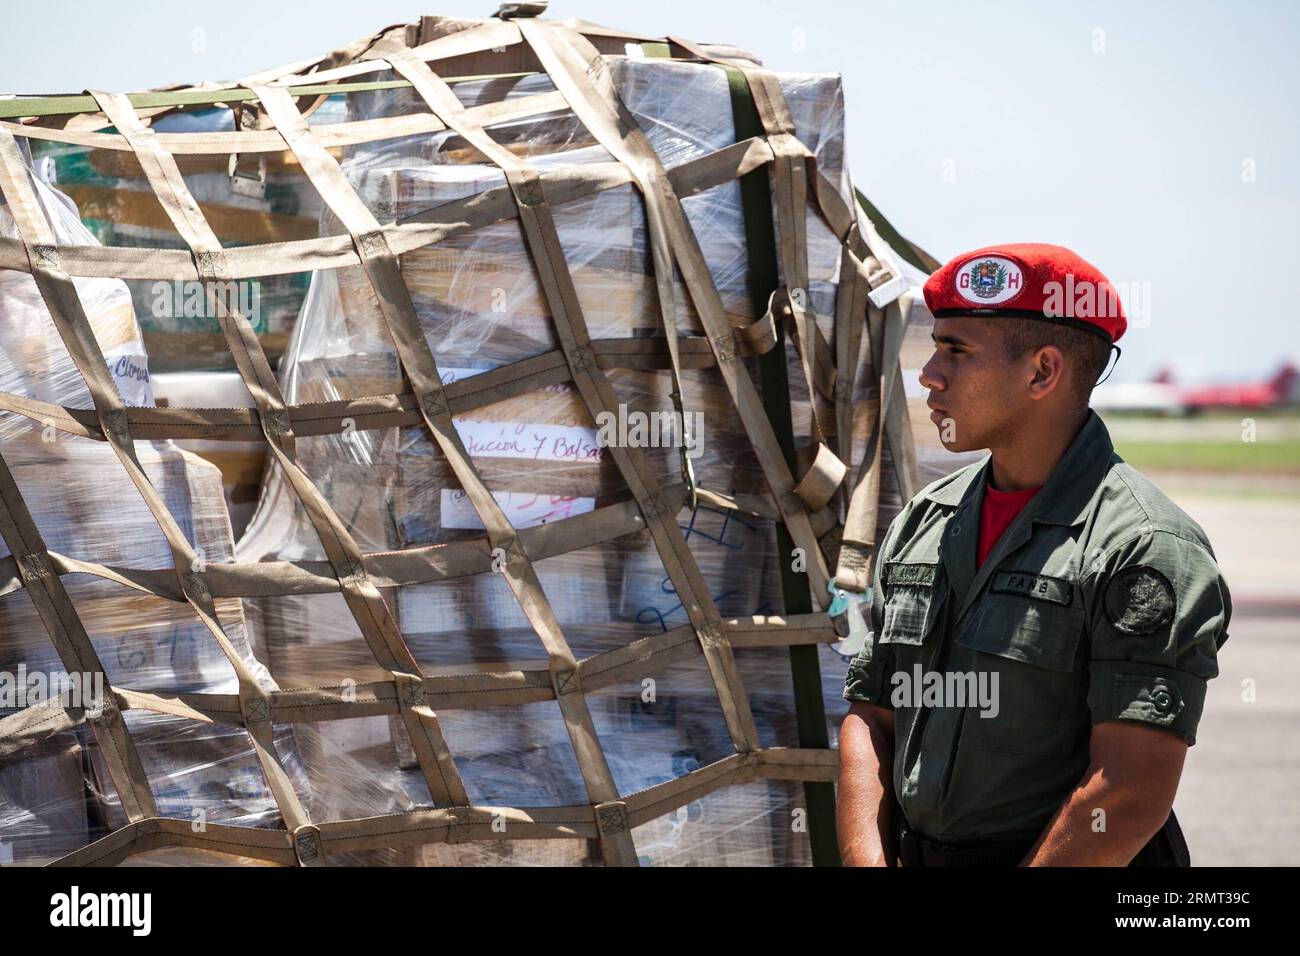 CARACAS, Aug. 12, 2014 -- A Venezuelan soldier watches the supplies for Palestinians at the international airport of Maiquetia, Caracas, Venezuela, on Aug. 12, 2014. Venezuela Tuesday shipped an initial 12 tons of humanitarian aid to the Palestinians stricken with Israel s offensive in the Gaza Strip, the Venezuelan News Agency (AVN) said. Boris Vergara) (da) (sp) VENEZUELA-CARACAS-GAZA-AID e BorisxVergara PUBLICATIONxNOTxINxCHN   Caracas Aug 12 2014 a Venezuelan Soldier Watches The SUPPLIES for PALESTINIANS AT The International Airport of  Caracas Venezuela ON Aug 12 2014 Venezuela Tuesday  t Stock Photo